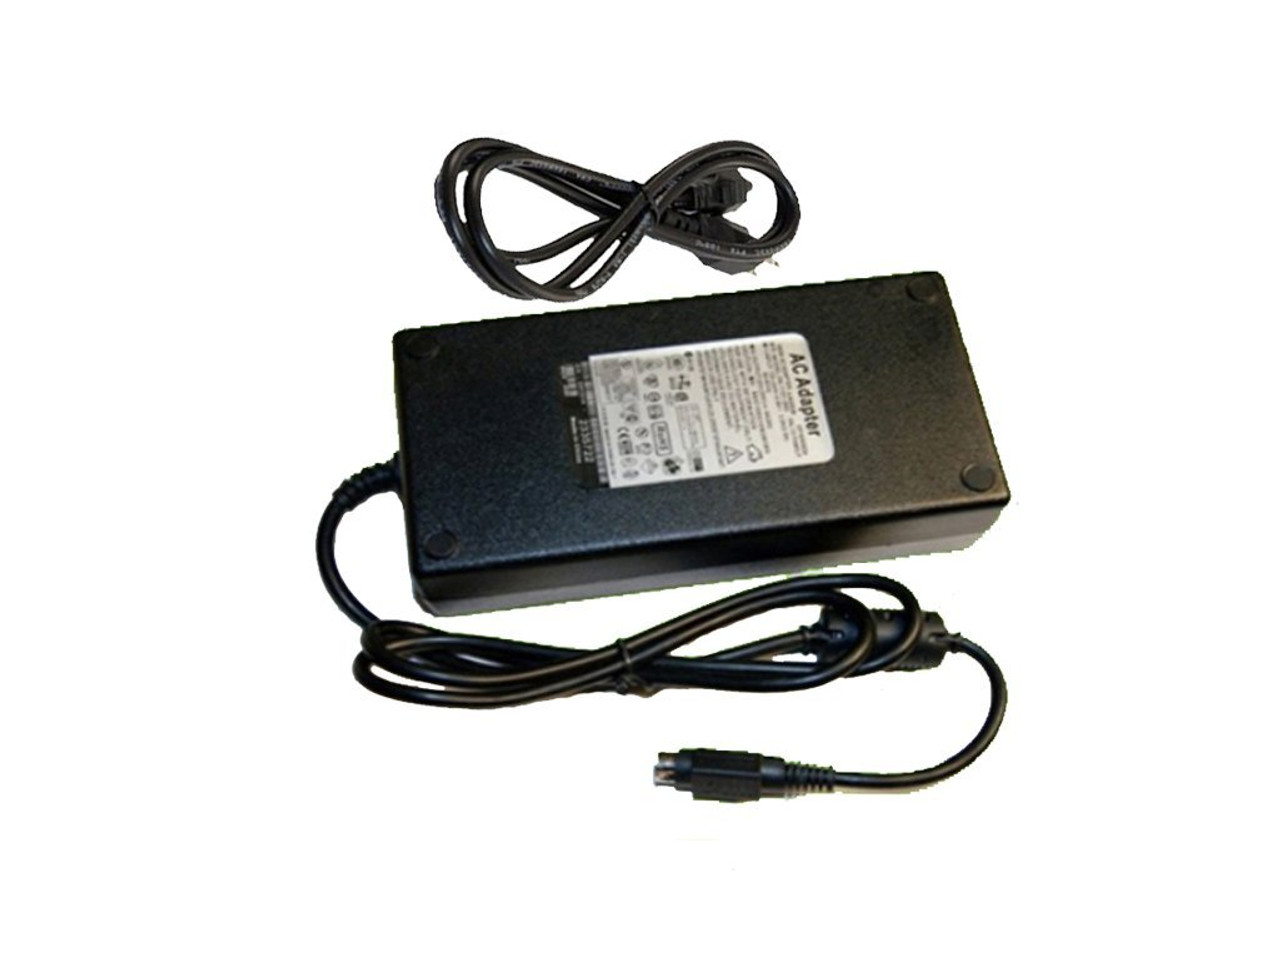 A9T80-40056 - HP Power Supply for Envy 5530 e-All-in-One Printer